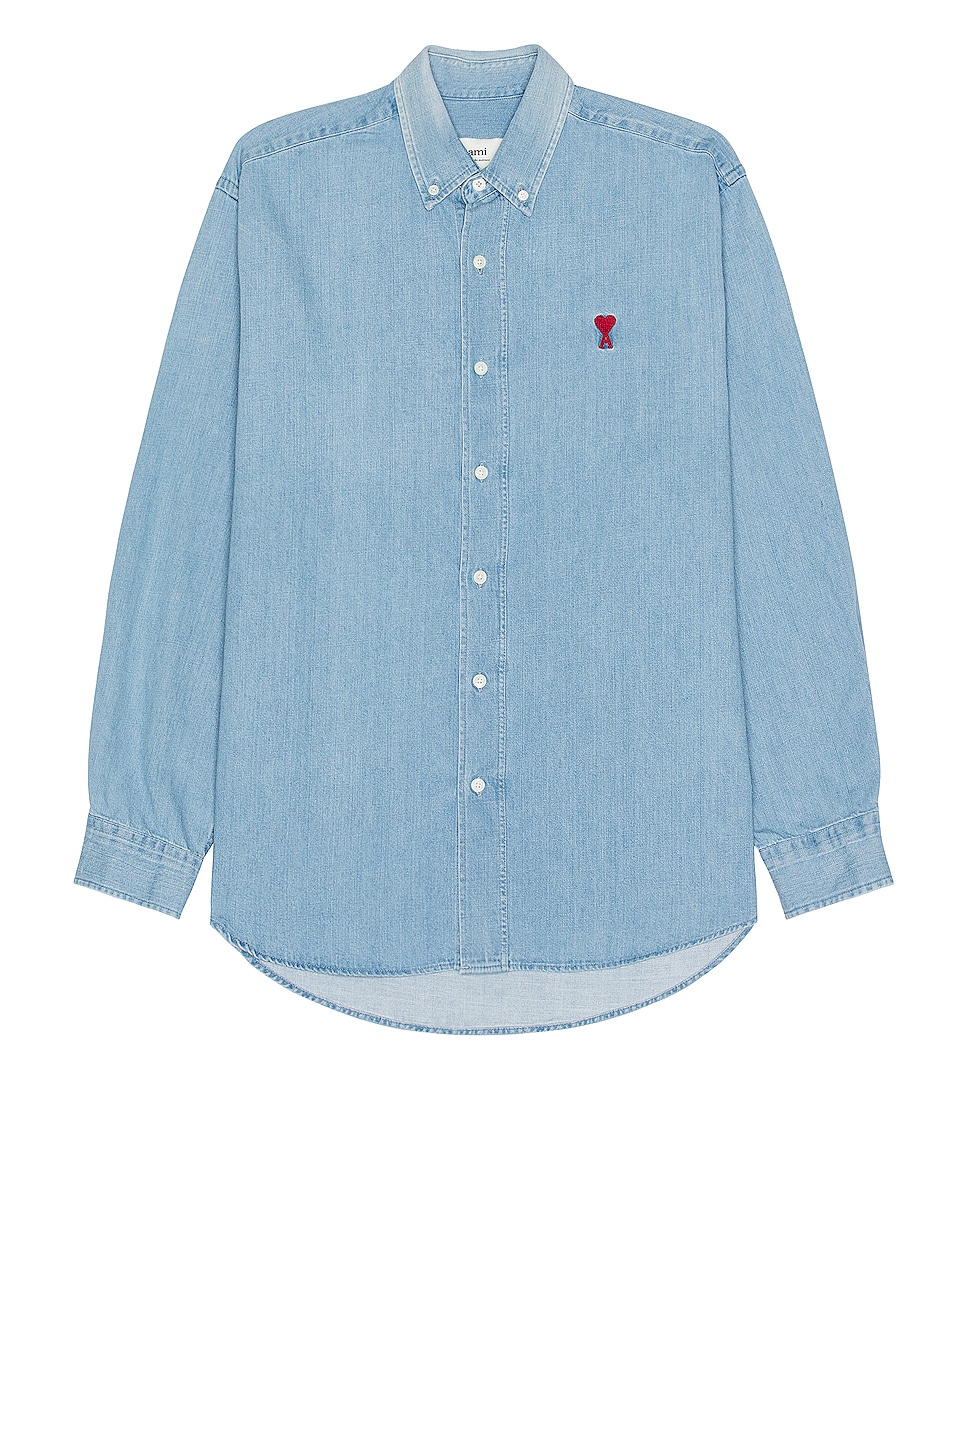 Image 1 of ami Denim Shirt in Used Blue